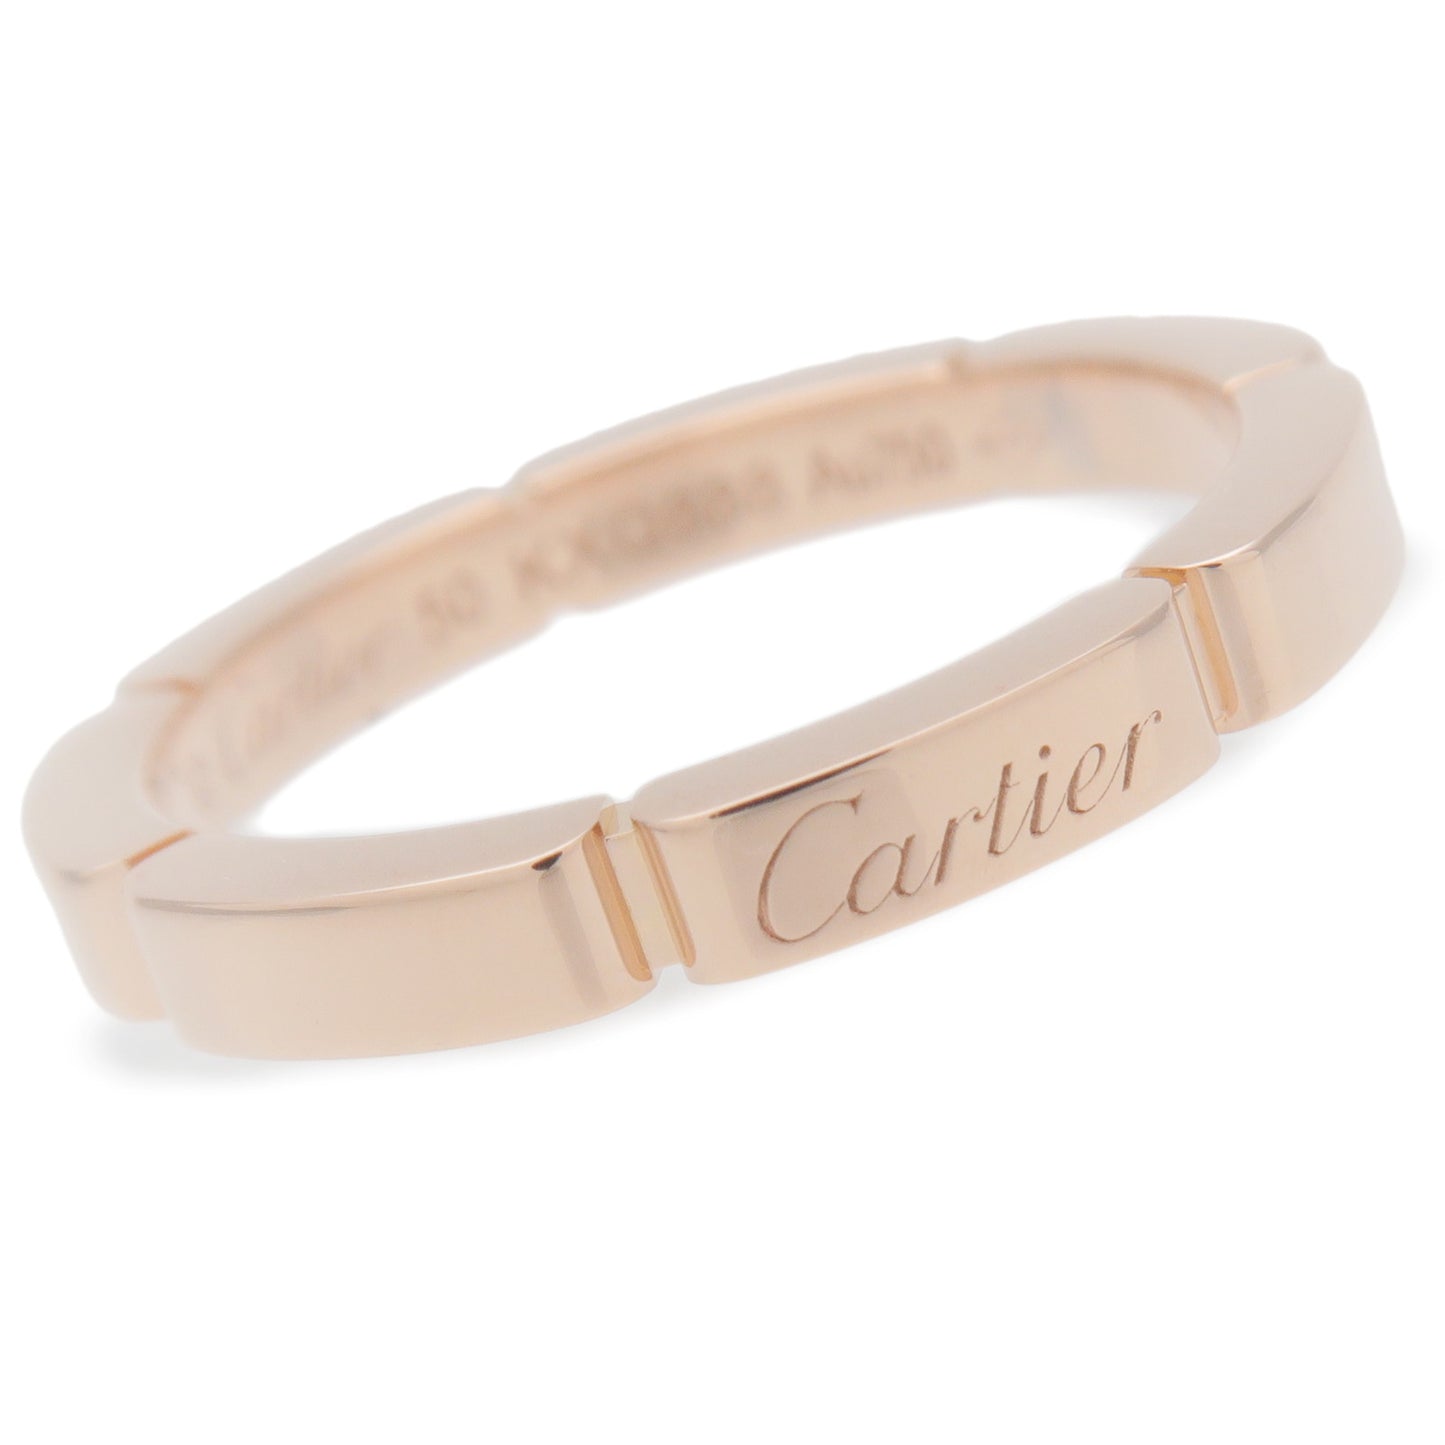 Cartier Maillon Panthere Ring K18PG 750PG Rose Gold #50 US5.5